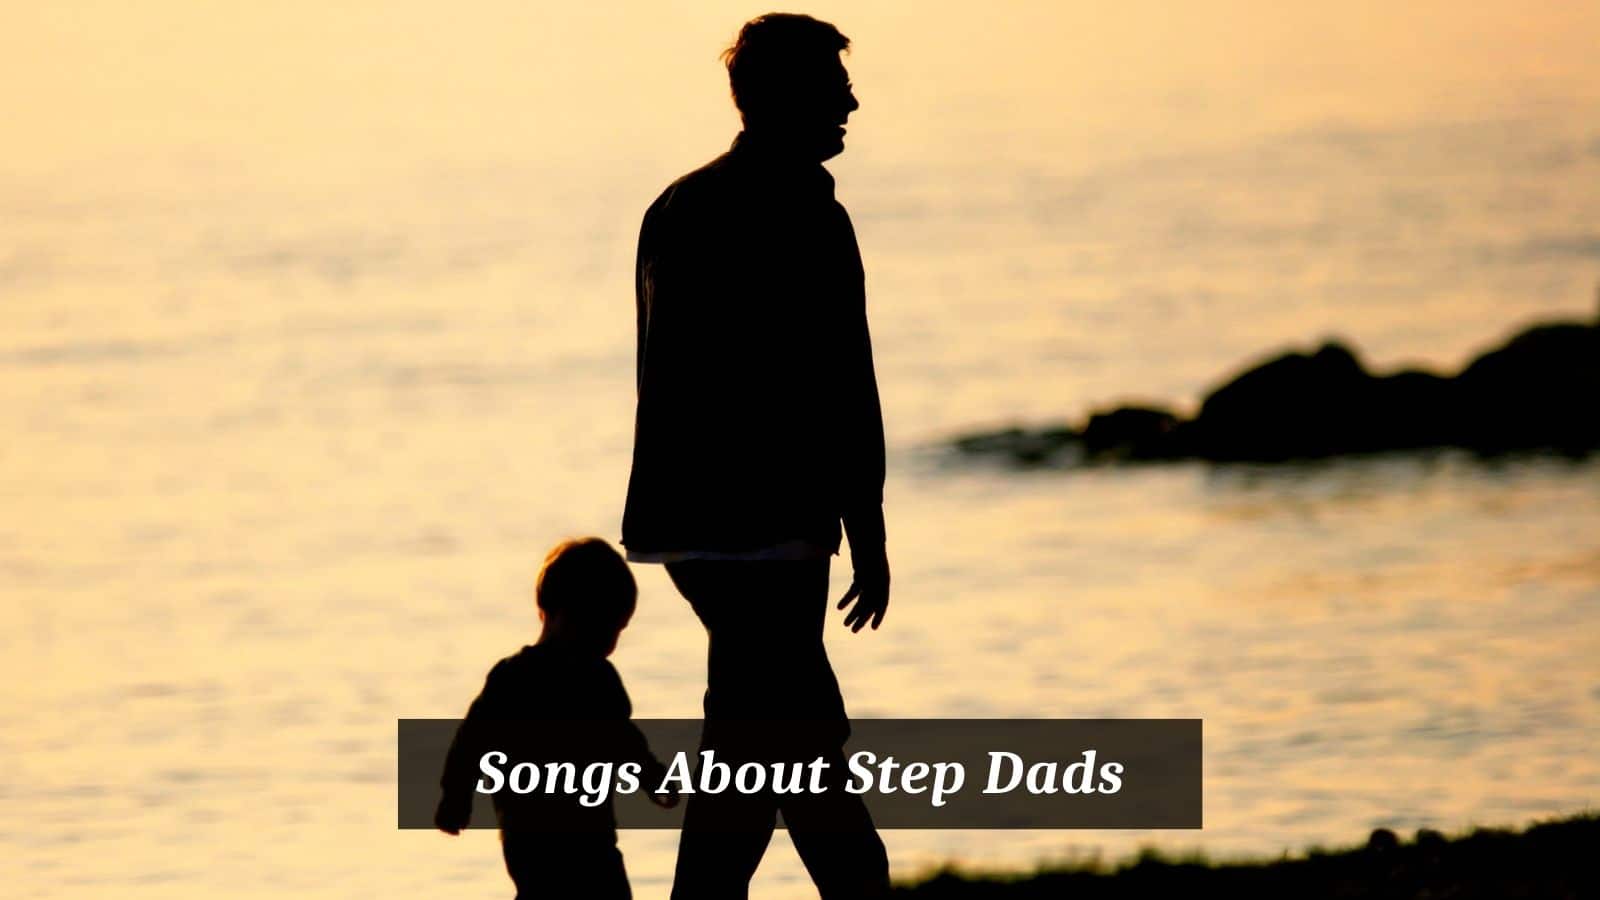 Songs About Step Dads